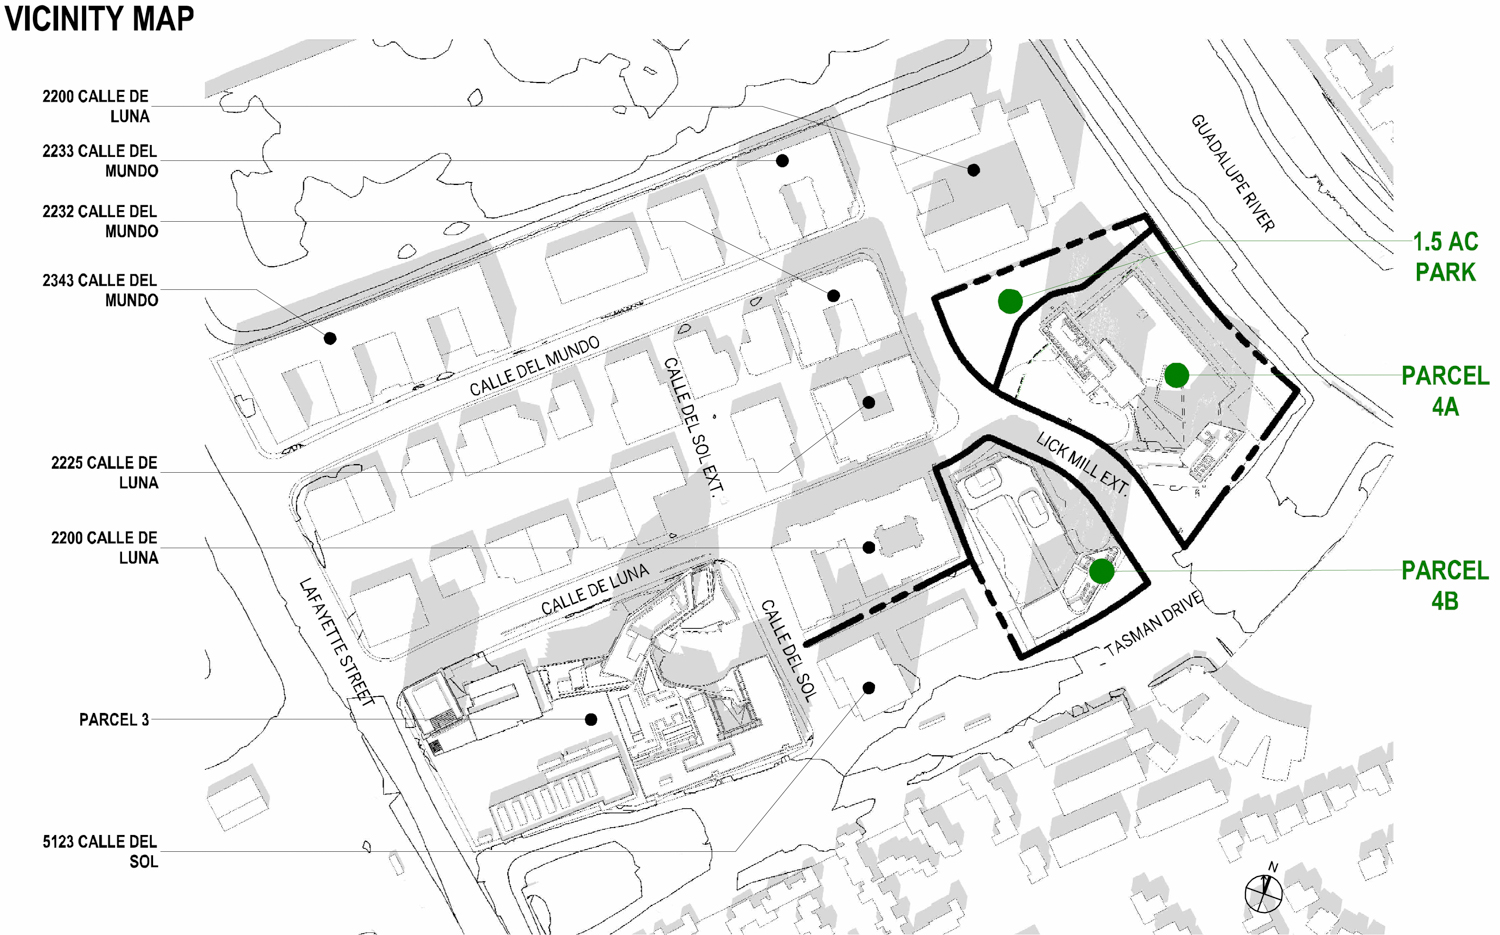 Tasman East Parcel 4 within the wider neighborhood context, illustration via project plans